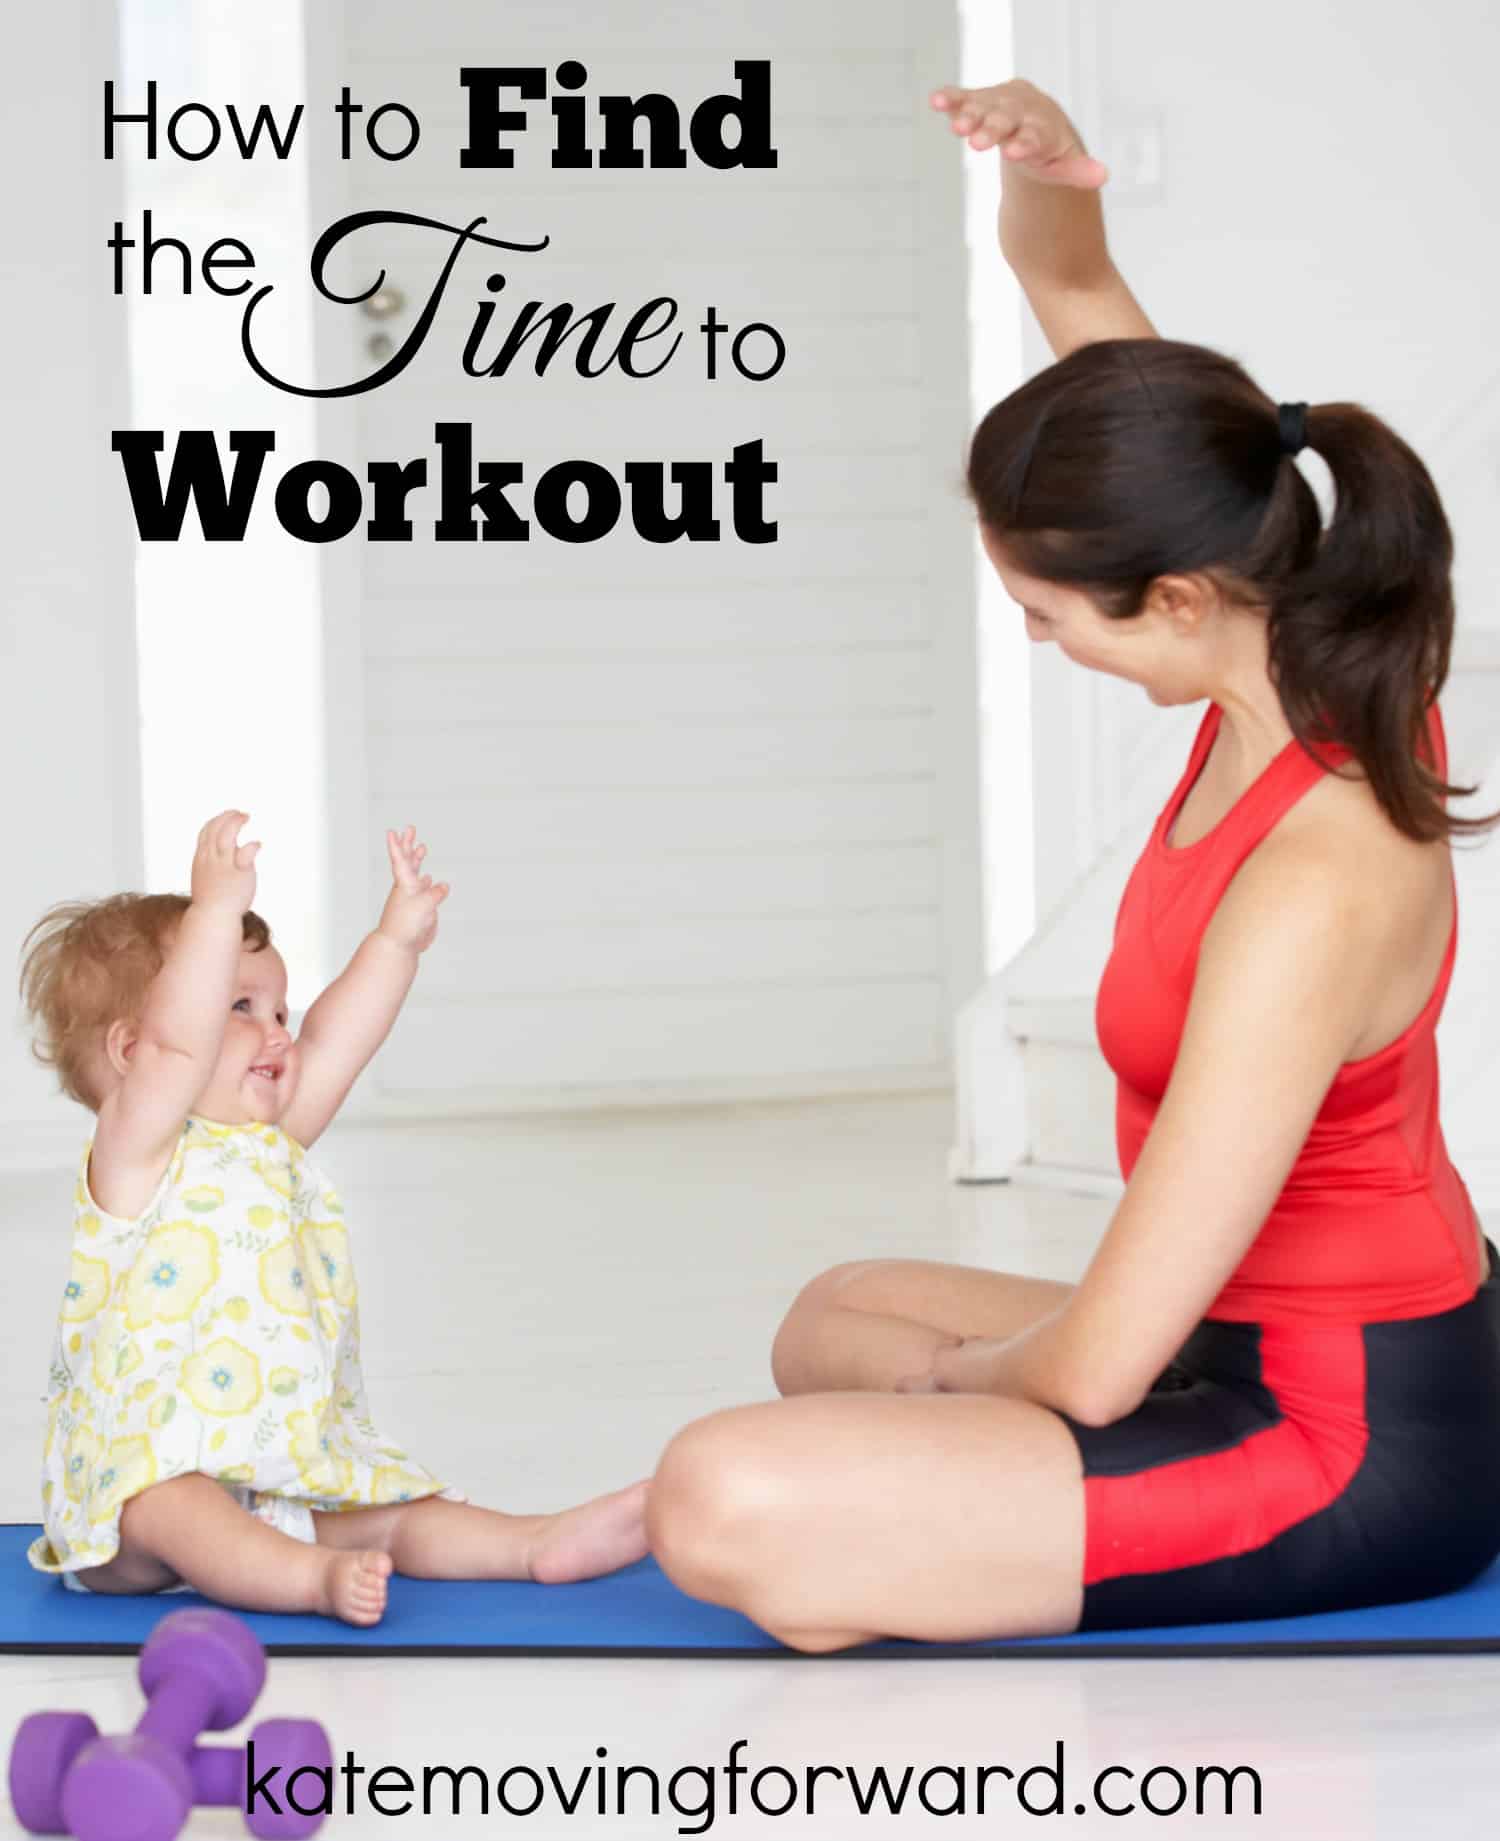 How to Find the Time to Workout